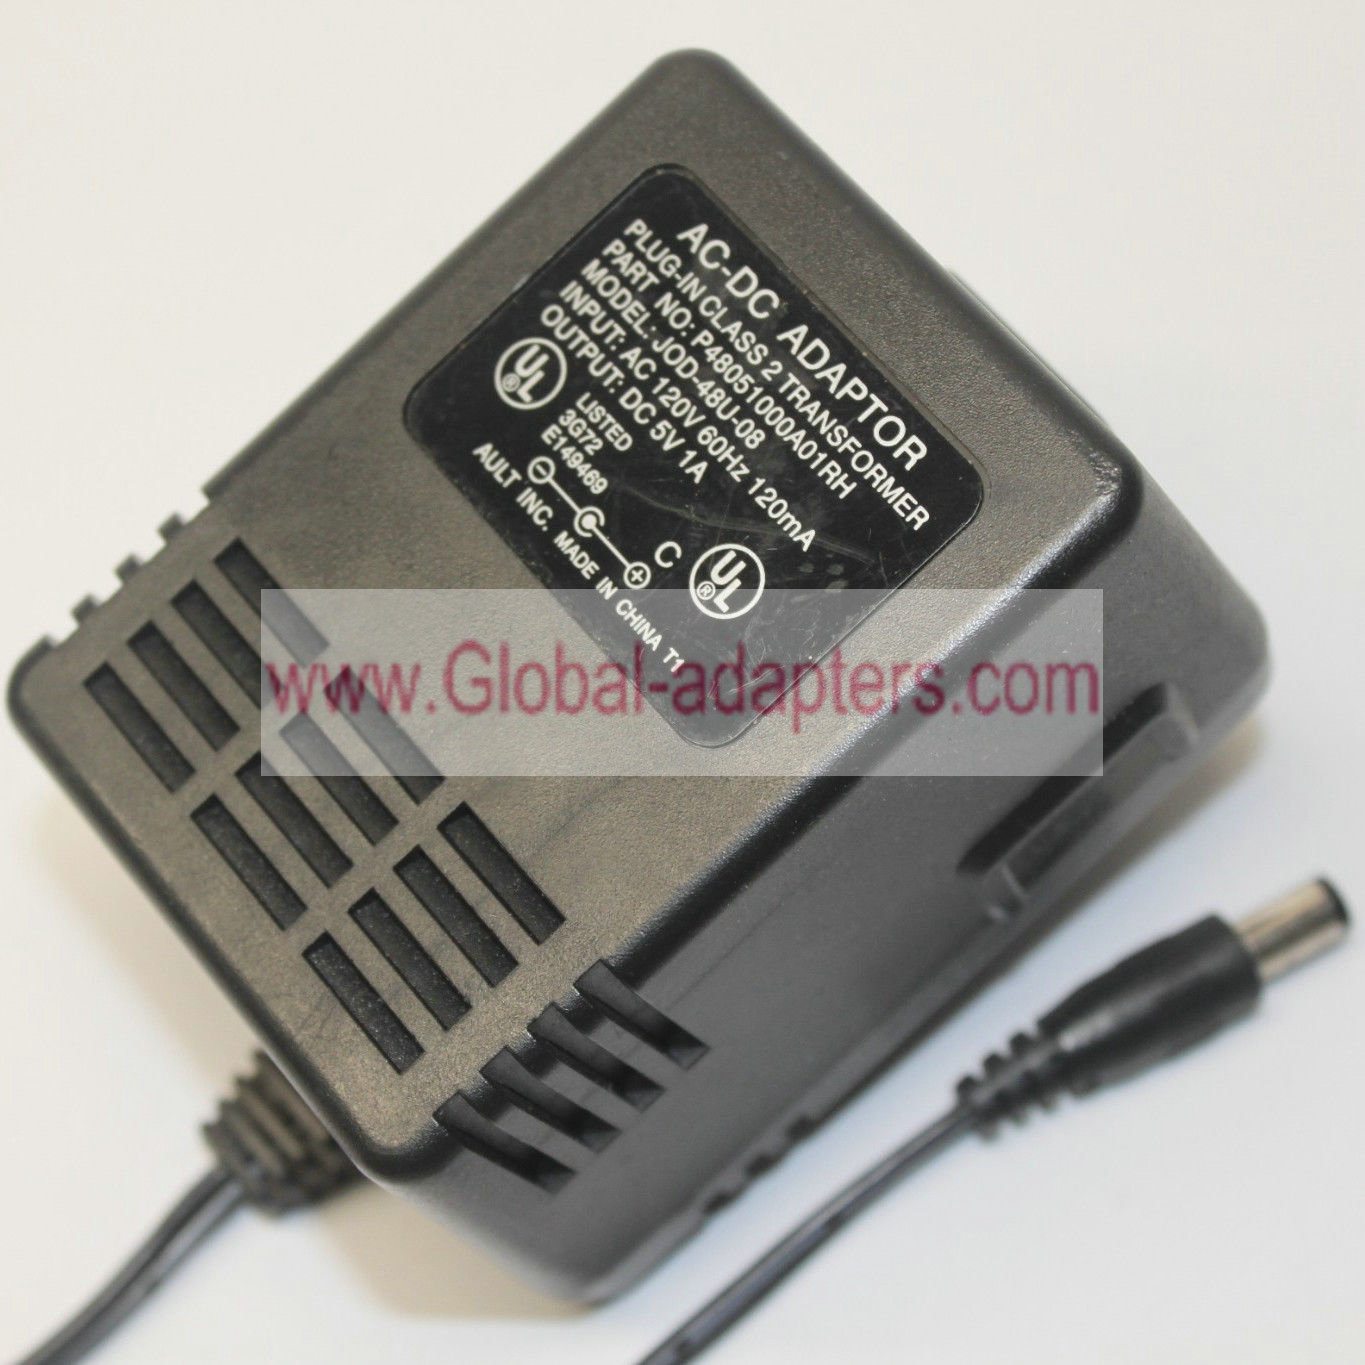 New Ault JOD-48U-08 AC Adapter Power Supply P48051000A01RH Wall Charger Transfomer 5 Volts 1.0 Amp